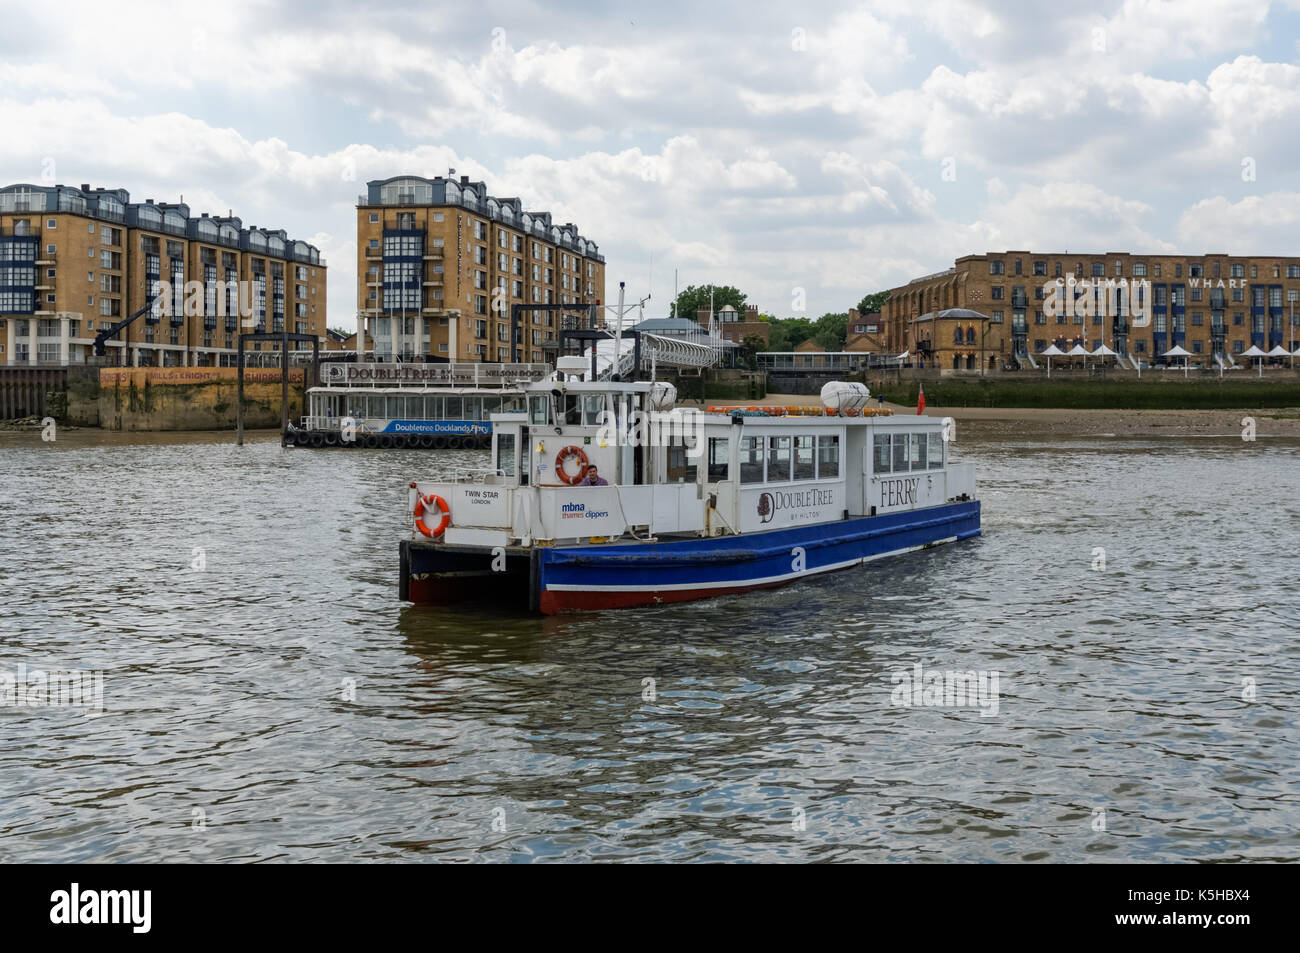 The Canary Wharf - Rotherhithe Ferry on the River Thames in London, England, United Kingdom, UK Stock Photo